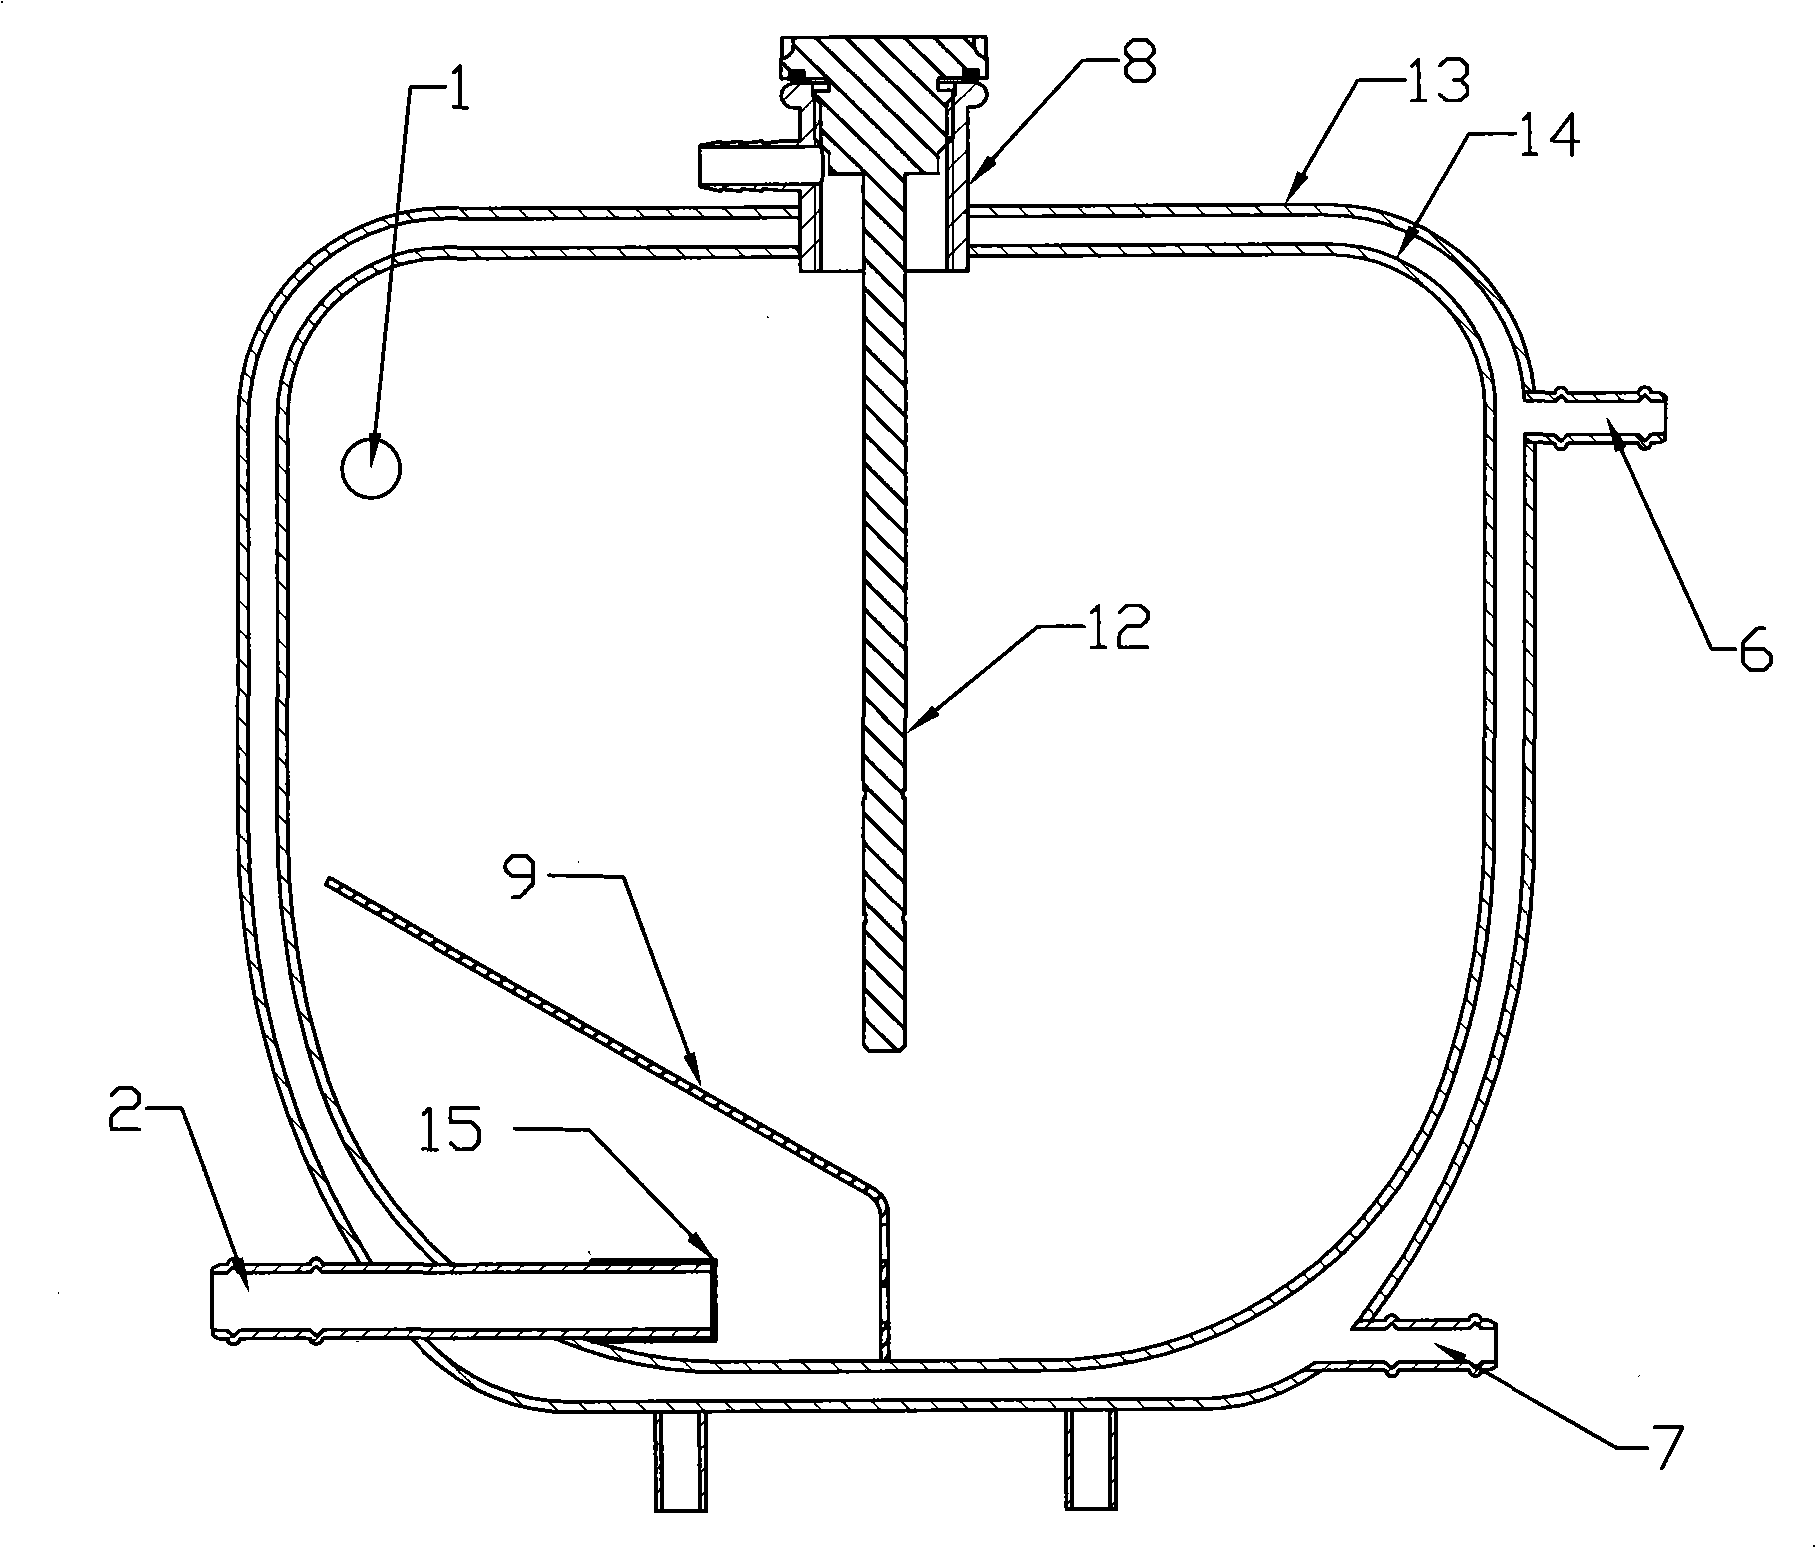 Broad sense crankcase oil tray for motorboat engine